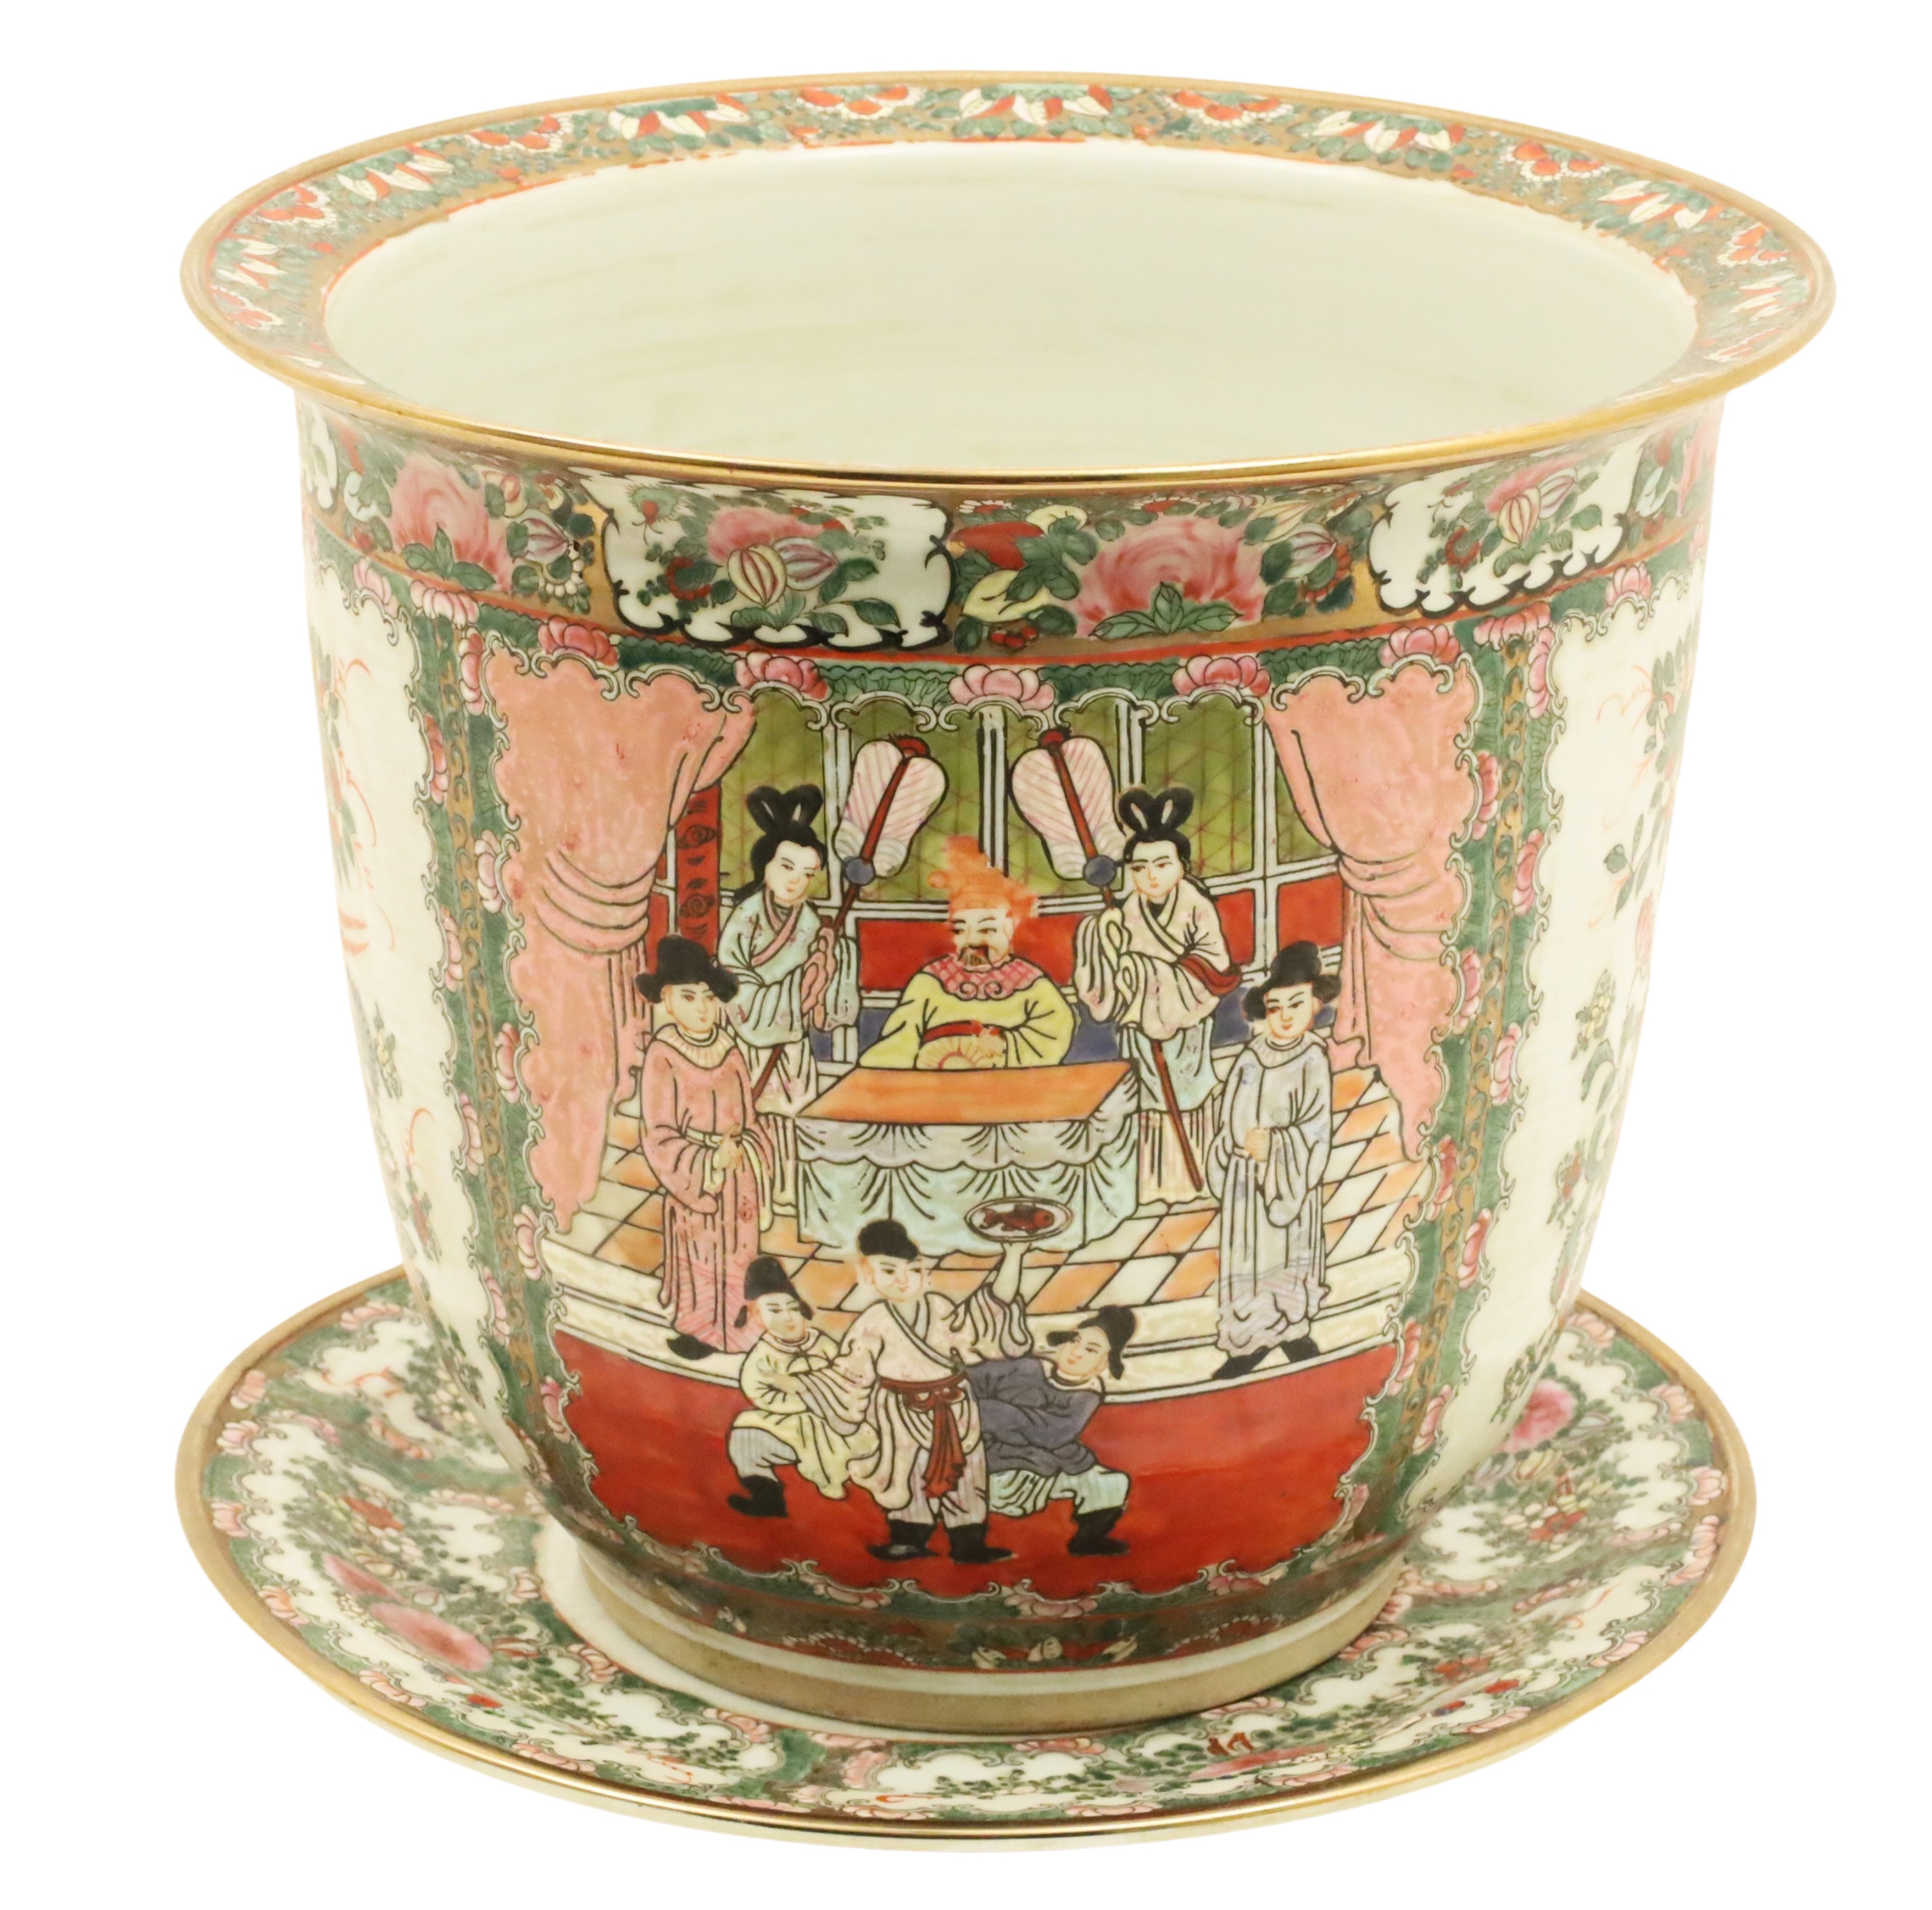 FAMILLE ROSE STYLE PORCELAIN BOWL AND